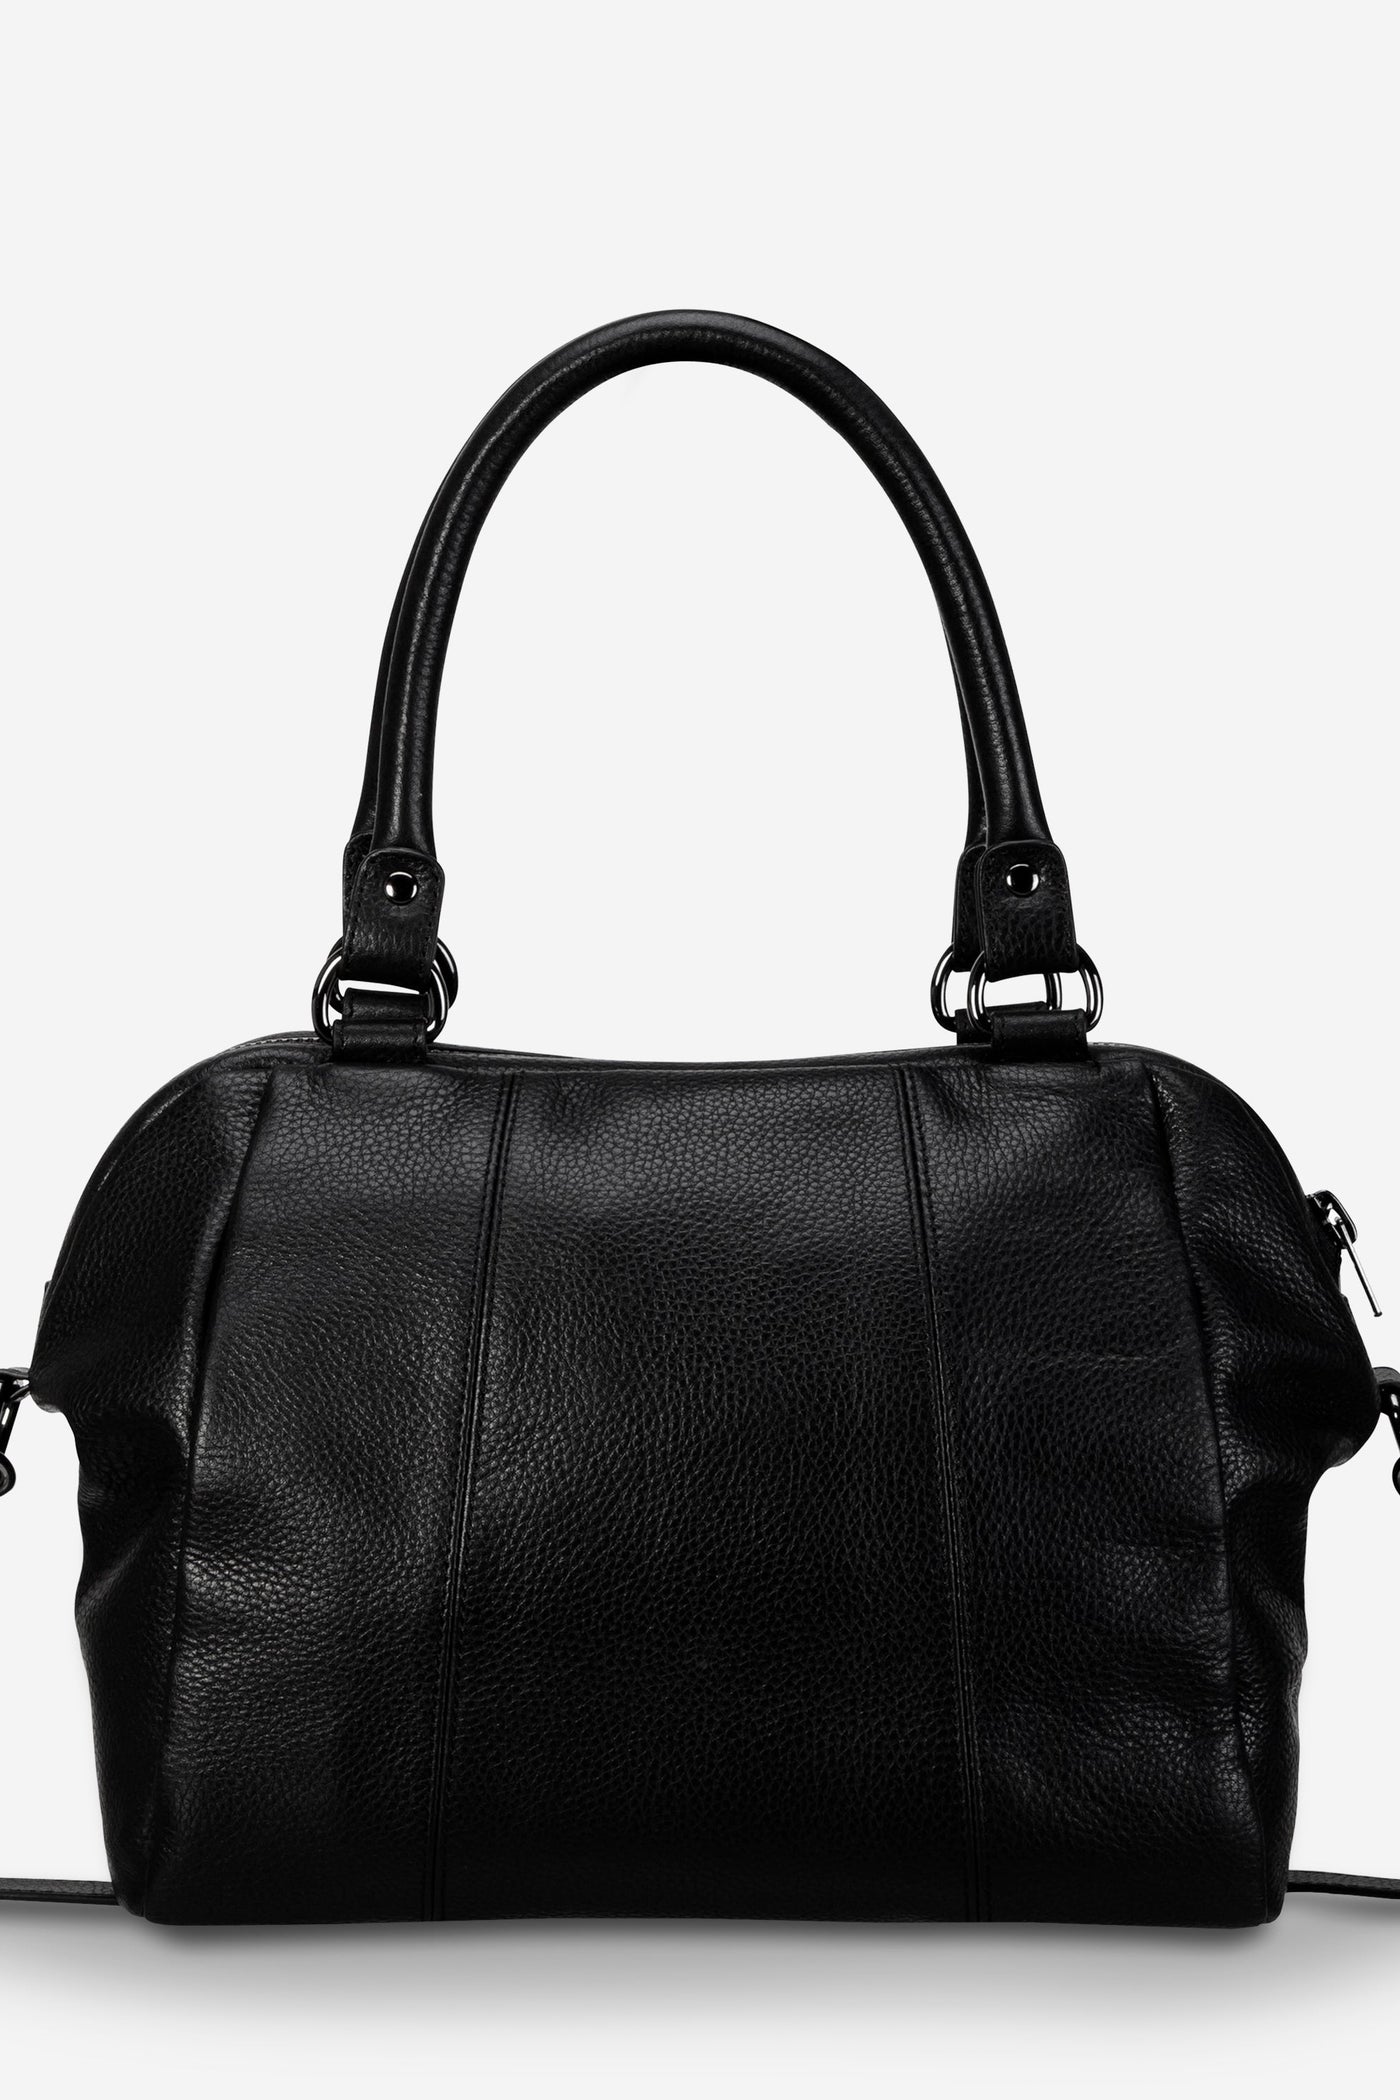 Status Anxiety Force of Being Bag - Black